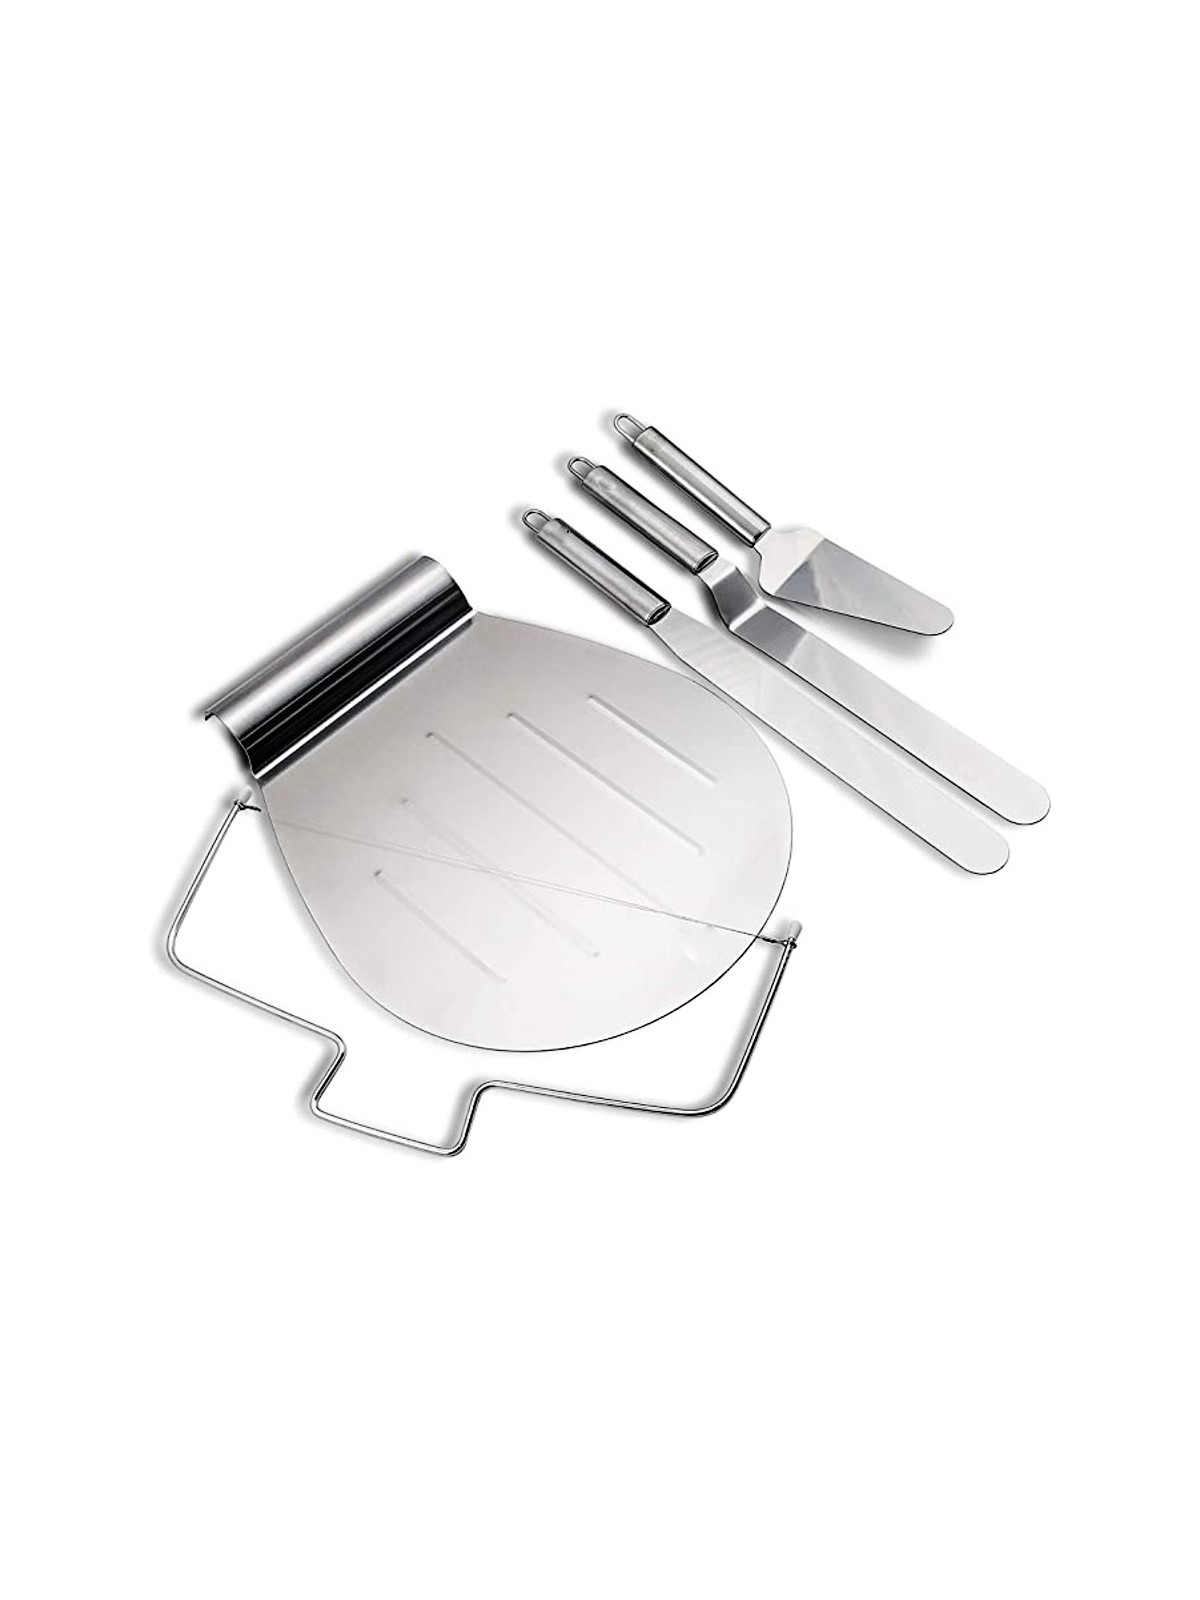 Set of 5 pieces of stainless steel baking utensils